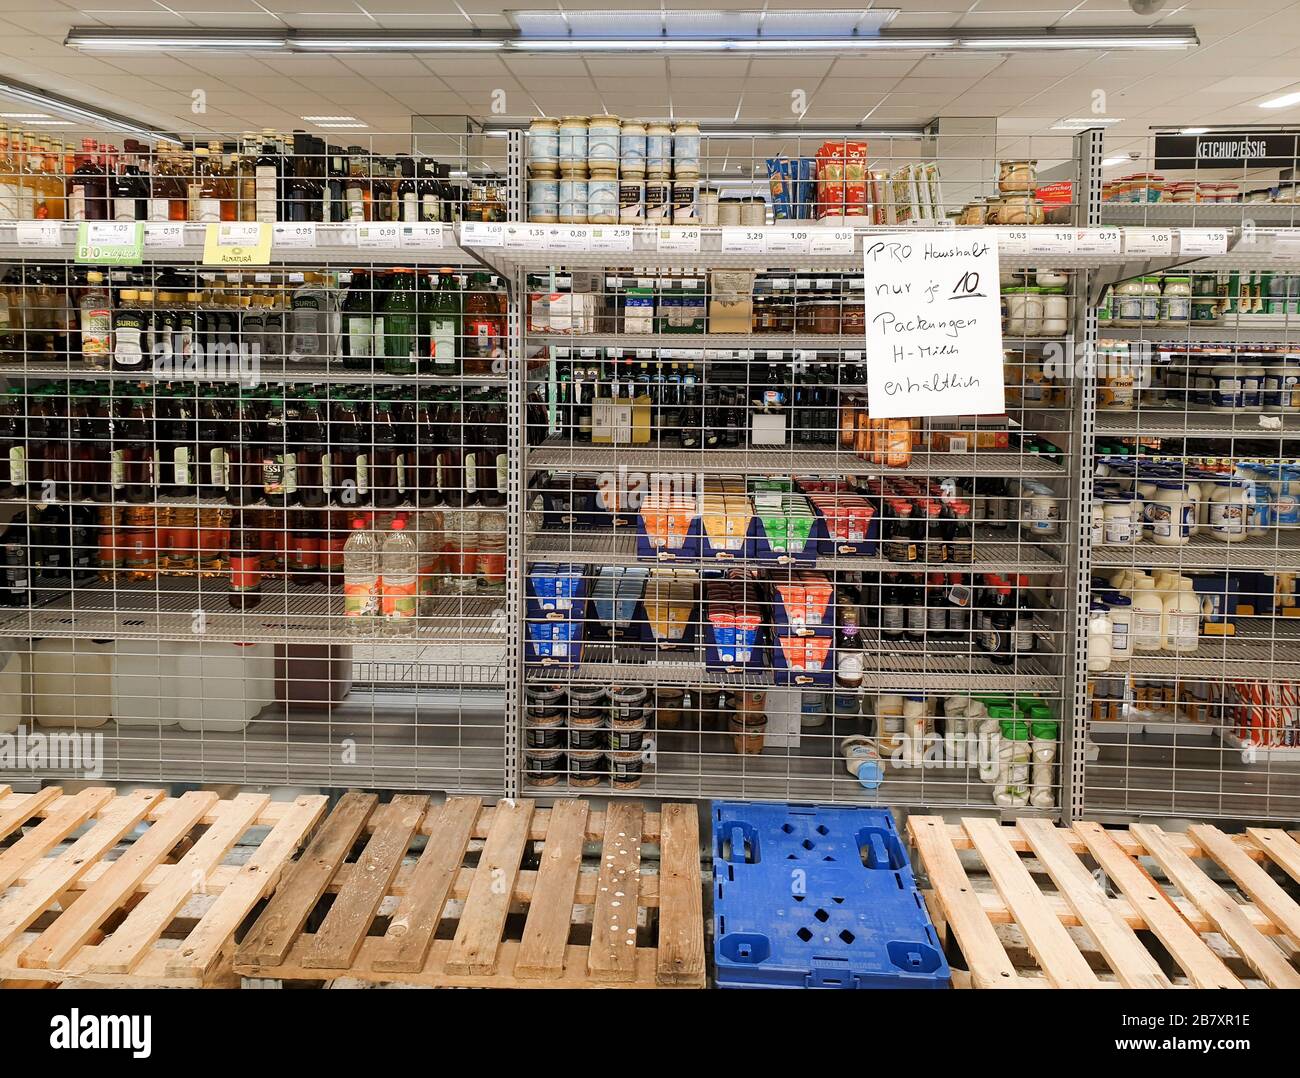 GEISLINGEN AN DER STEIGE, GERMANY - MARCH 16, 2020: Supermarket with empty pallets restricting milk ('Only 10 liters of milk available per household') Stock Photo